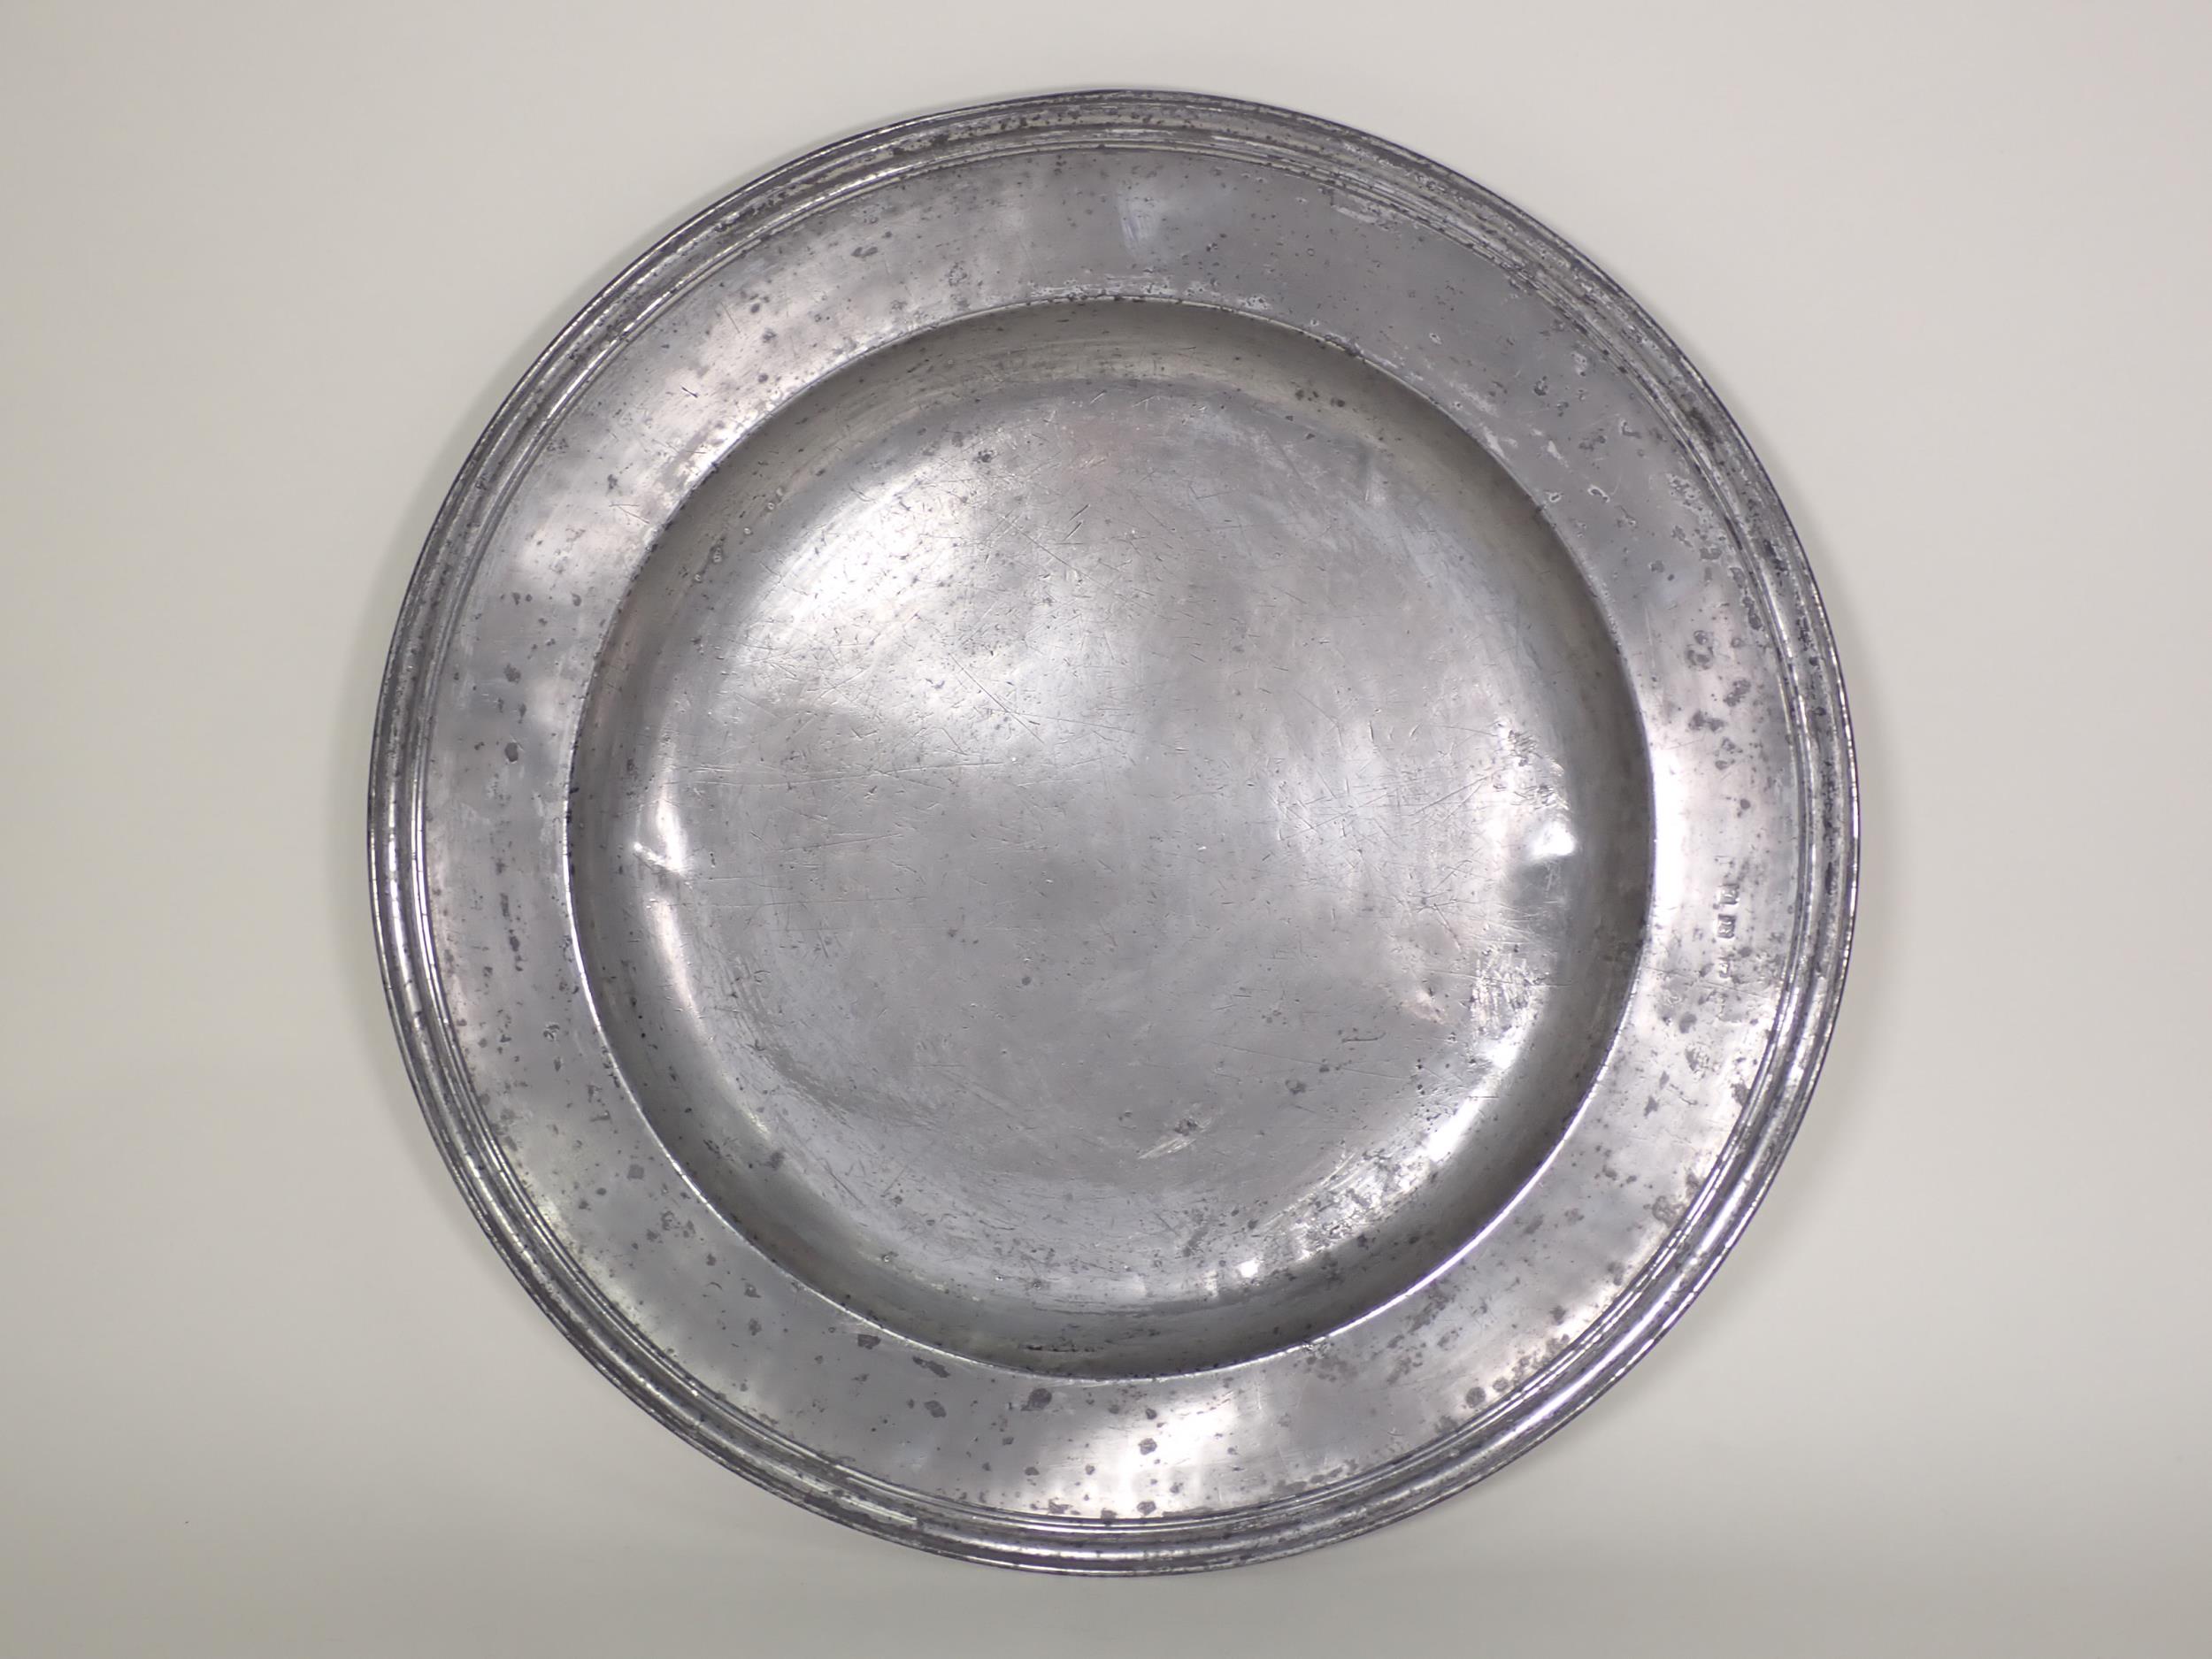 A c.1700 Pewter Charger with touchmarks for John Baskerville, with reeded edge and stamped